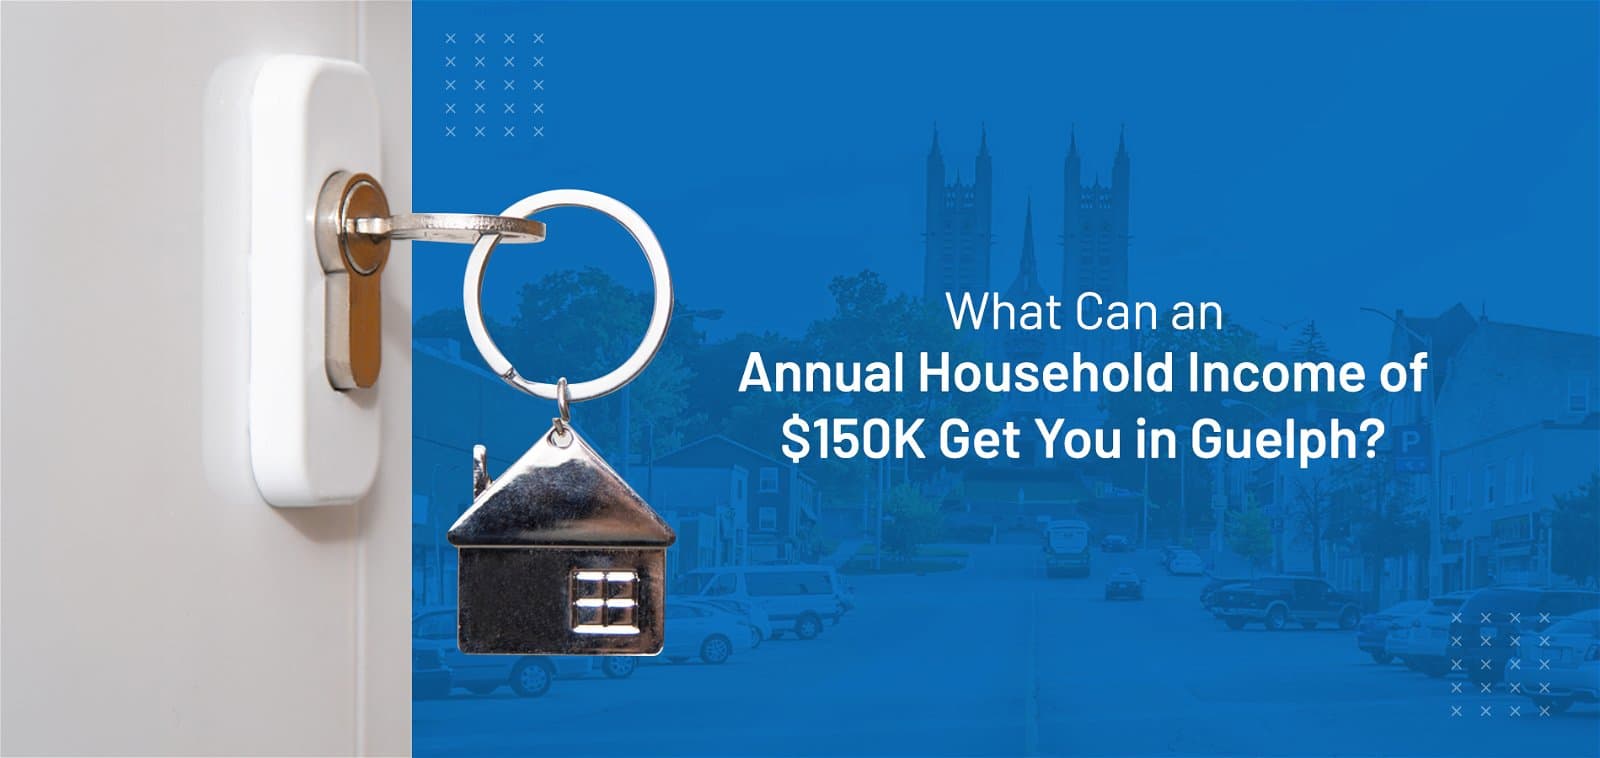 What Can an Annual Household Income of $150K Get You in Guelph?